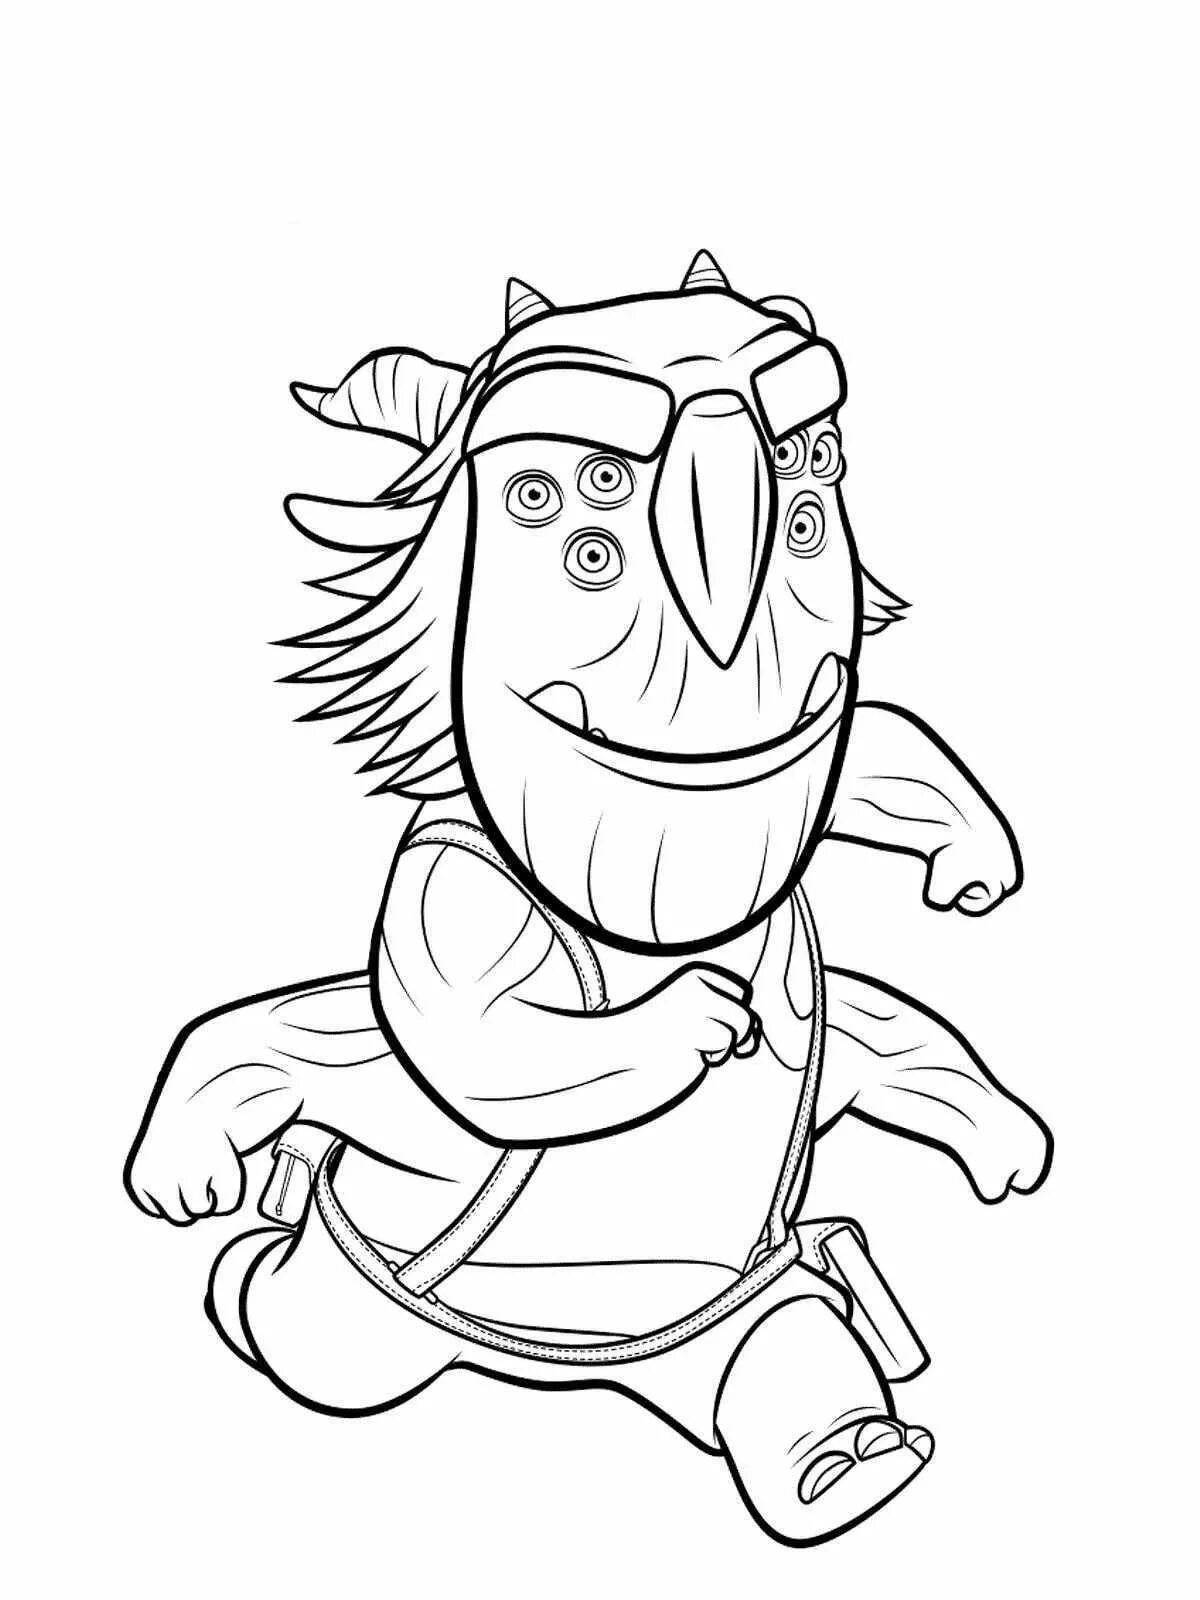 Playful gujutsu characters coloring page for kids